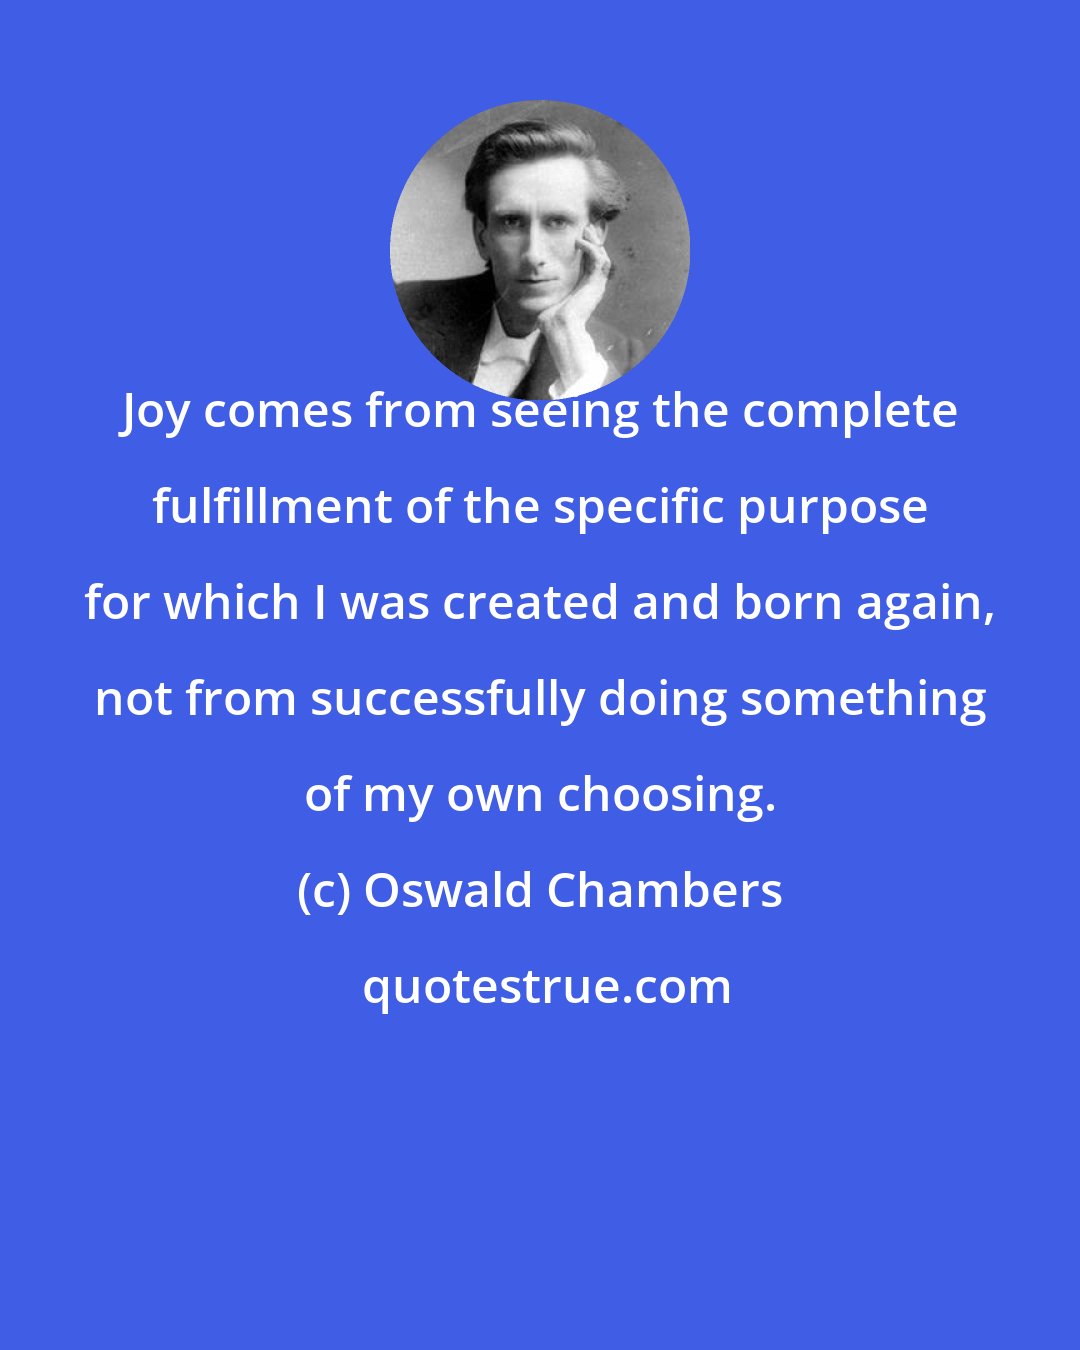 Oswald Chambers: Joy comes from seeing the complete fulfillment of the specific purpose for which I was created and born again, not from successfully doing something of my own choosing.